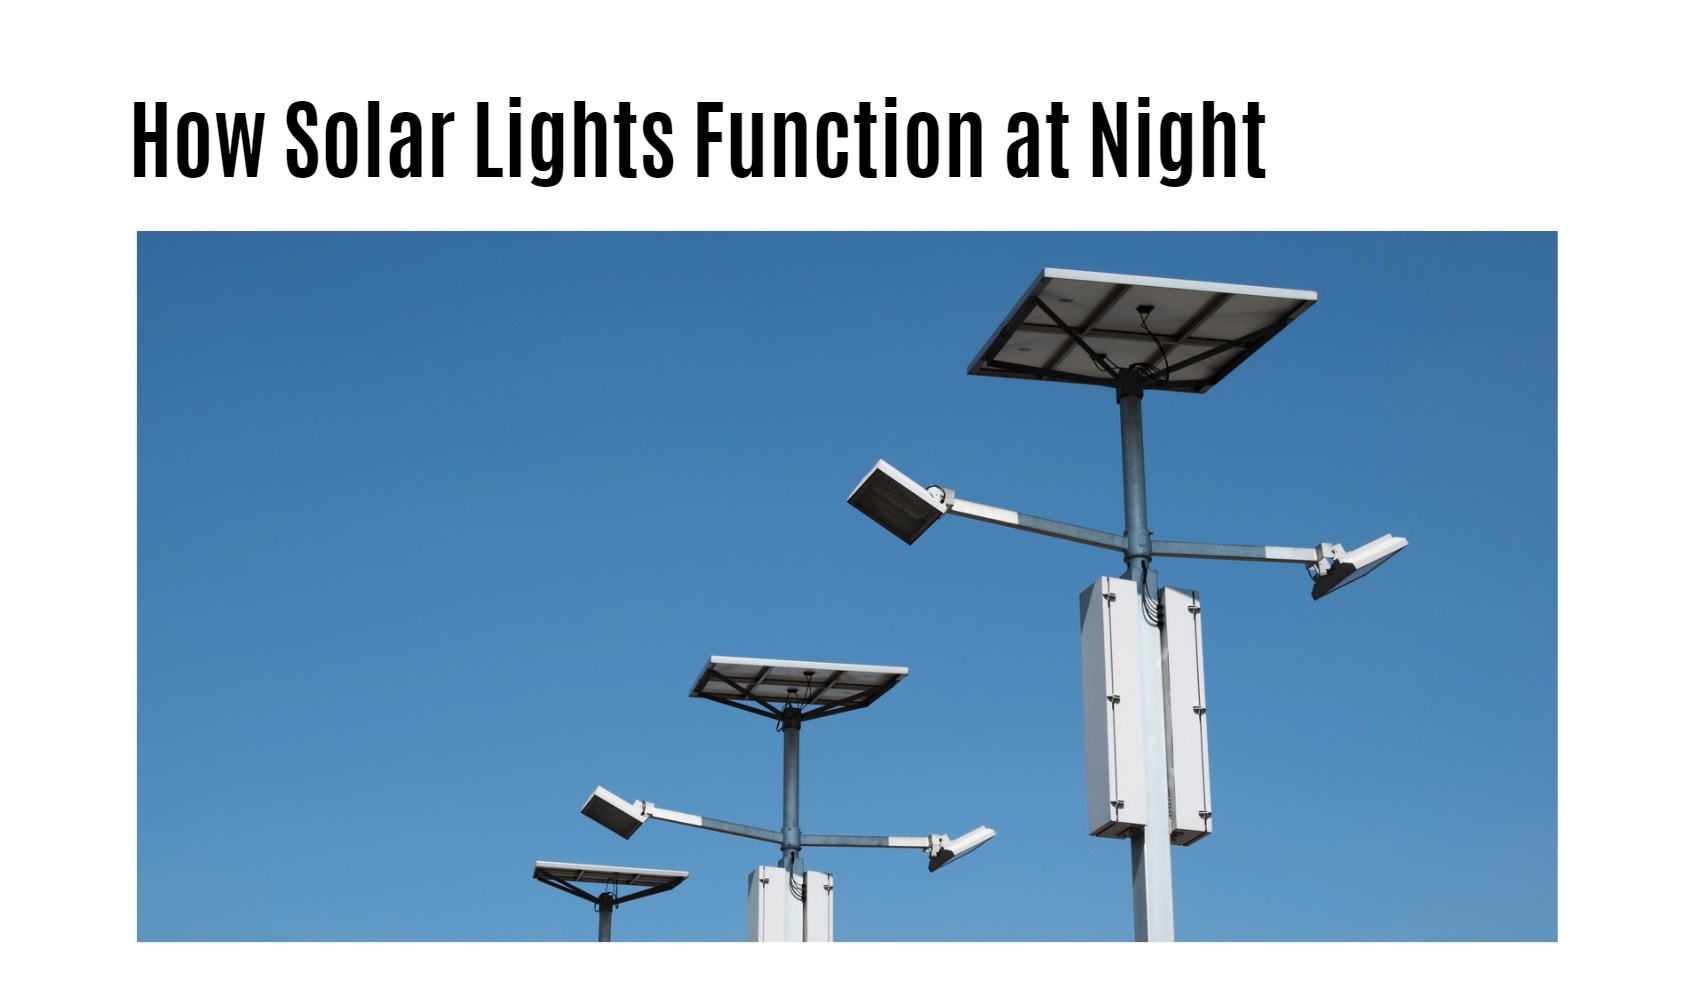 Understanding How Solar Lights Function at Night: A Guide for Energy Professionals